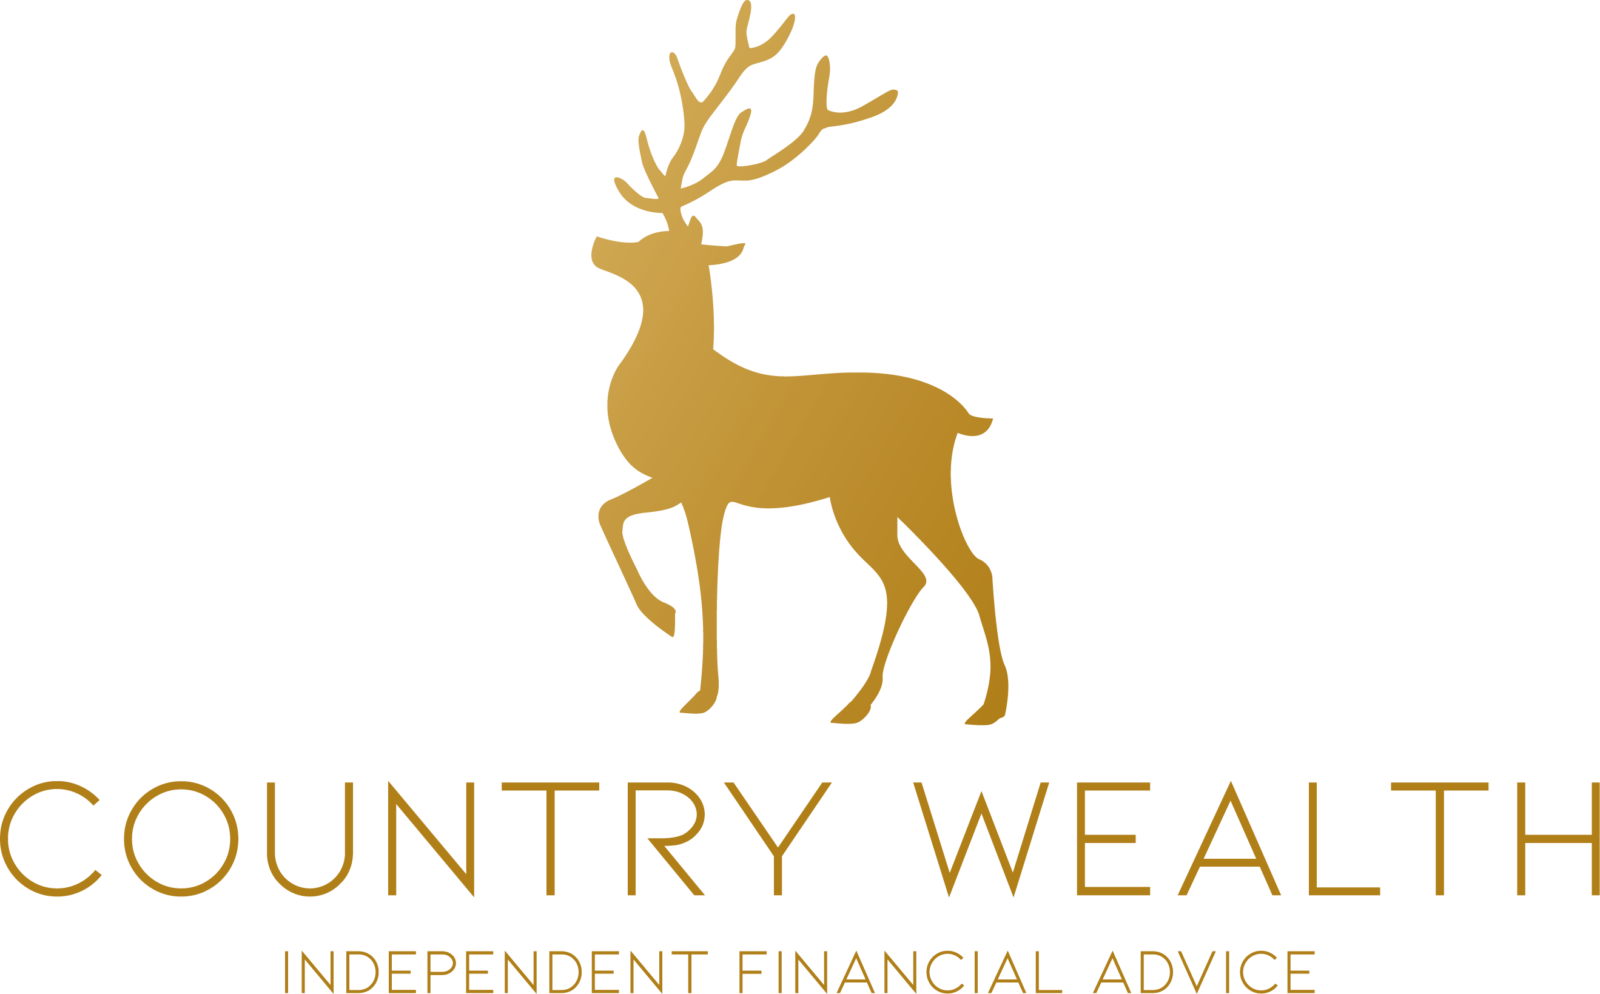 Country Wealth Ltd